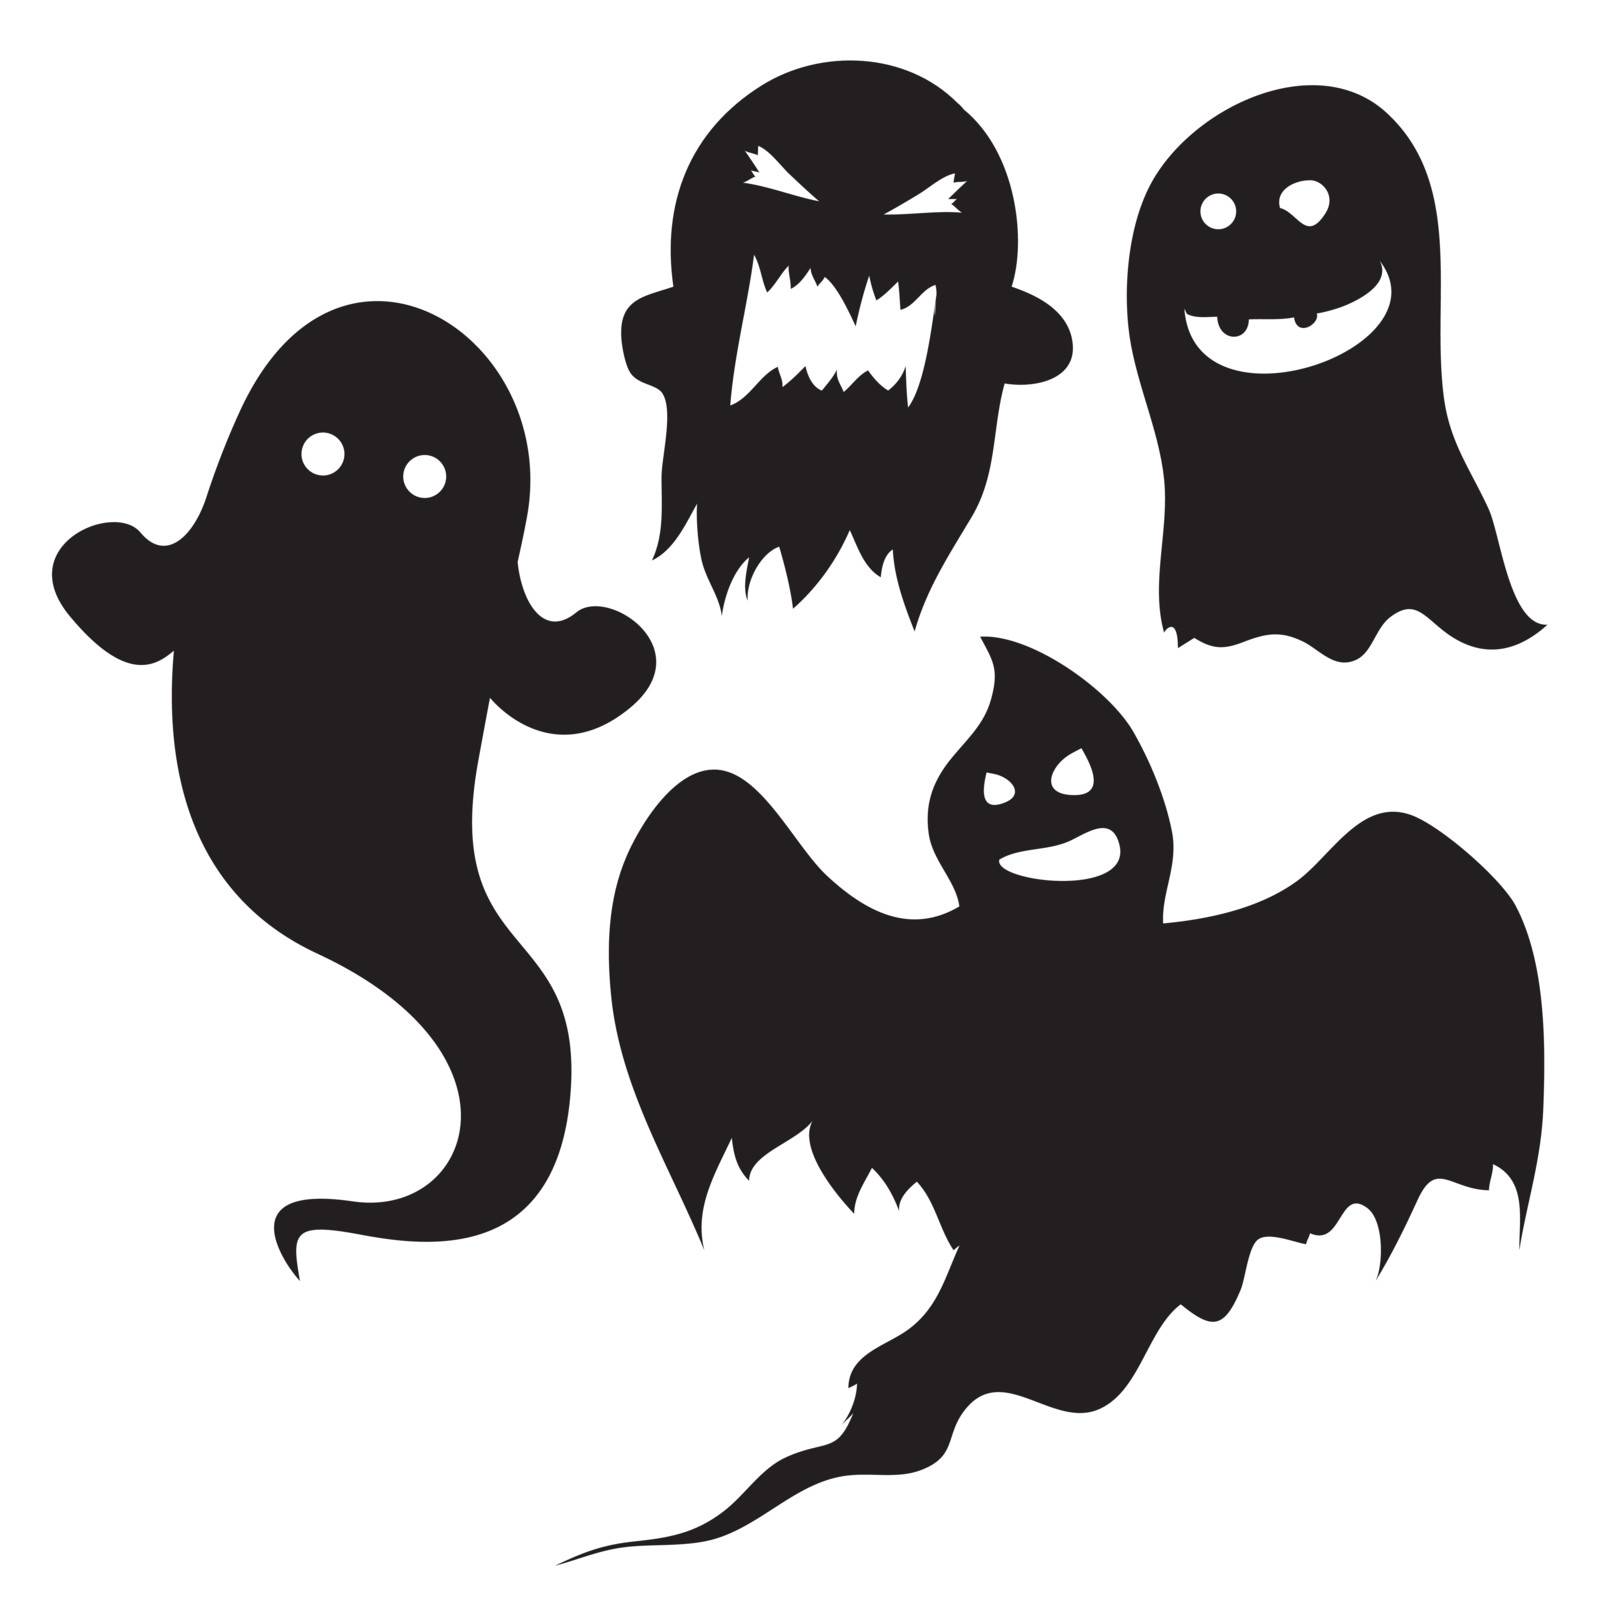 Set of ghost silhouettes for halloween or spooky designs.